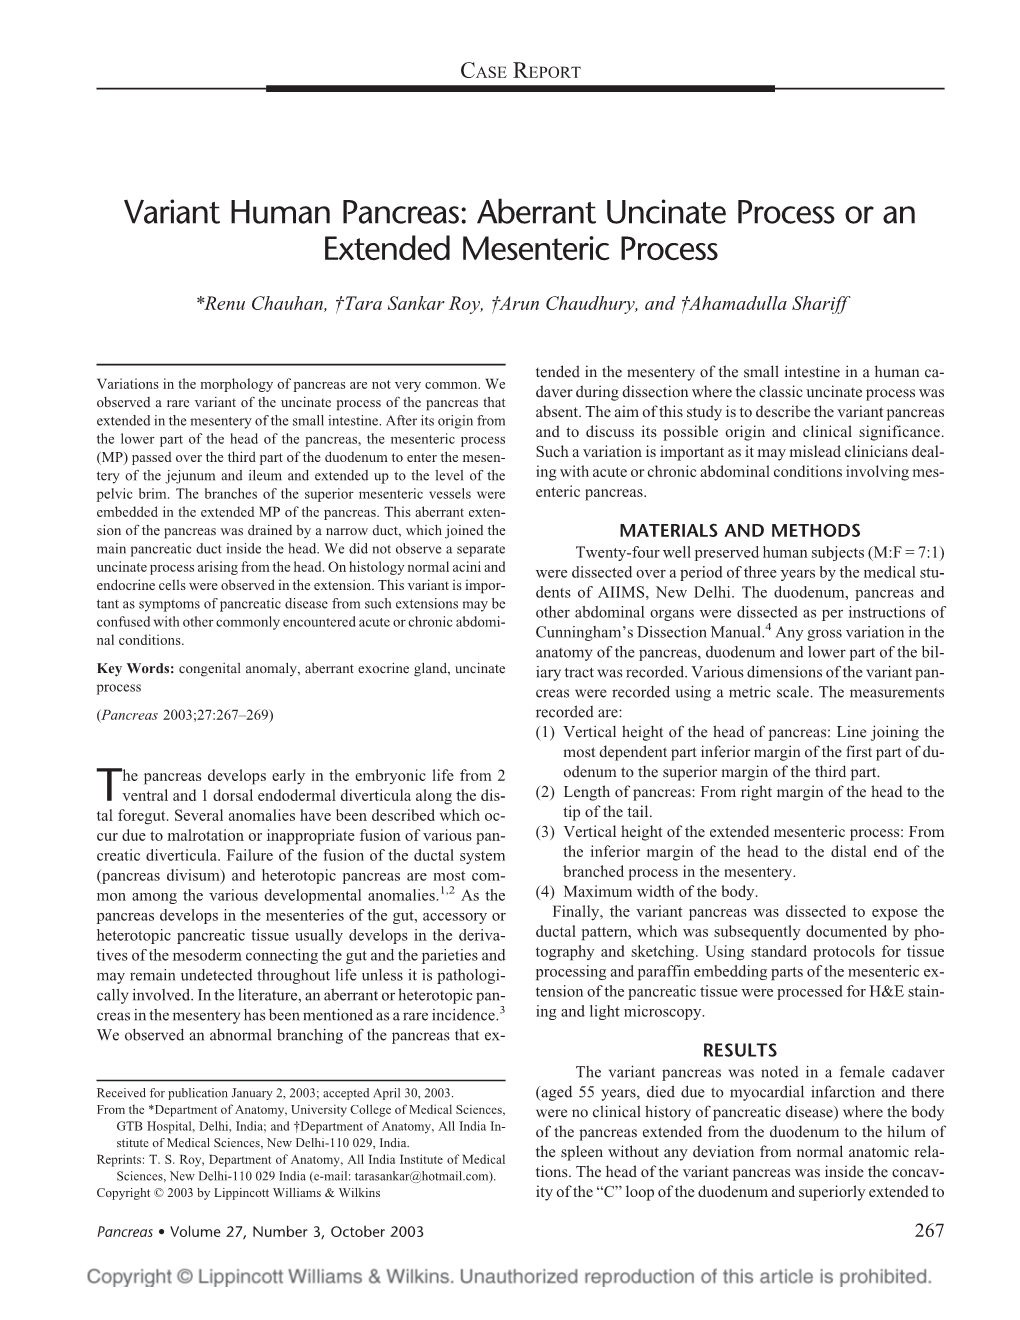 Variant Human Pancreas: Aberrant Uncinate Process Or an Extended Mesenteric Process